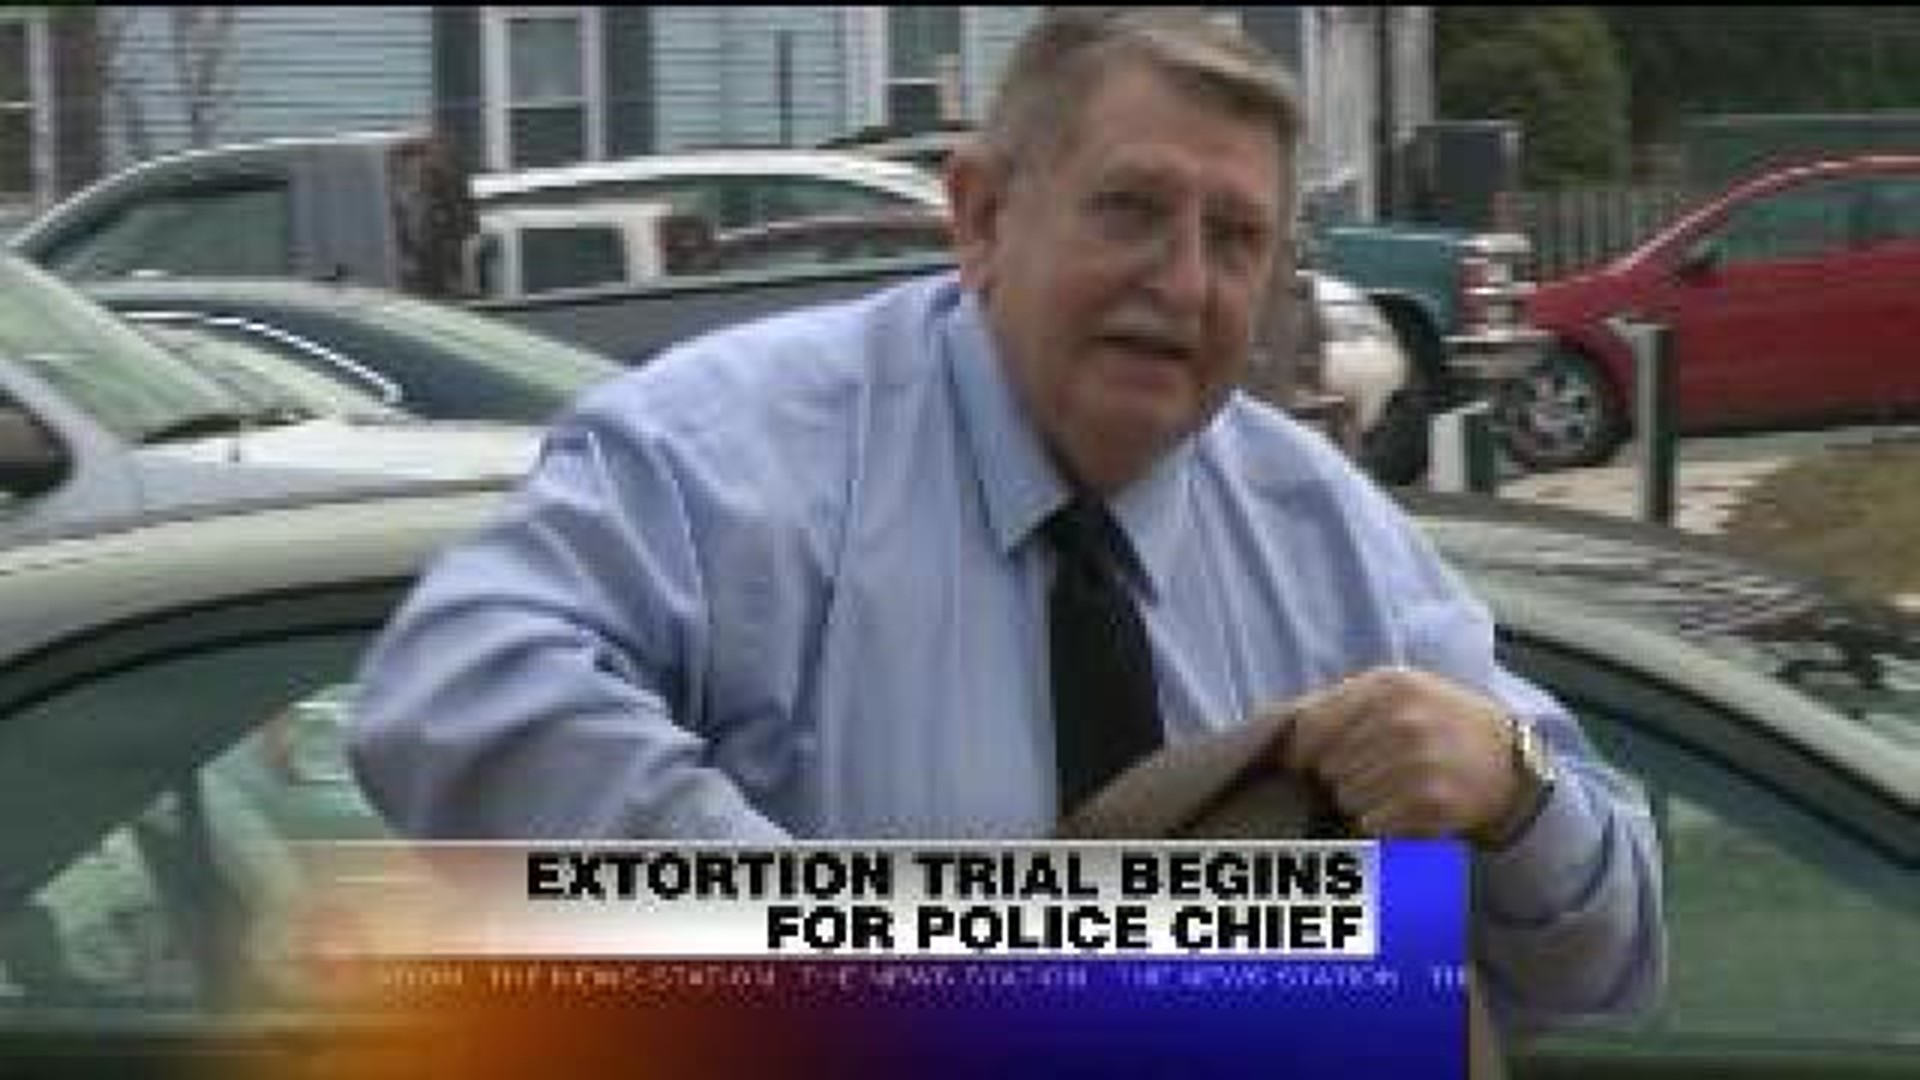 Extortion Trial Begins for Police Chief